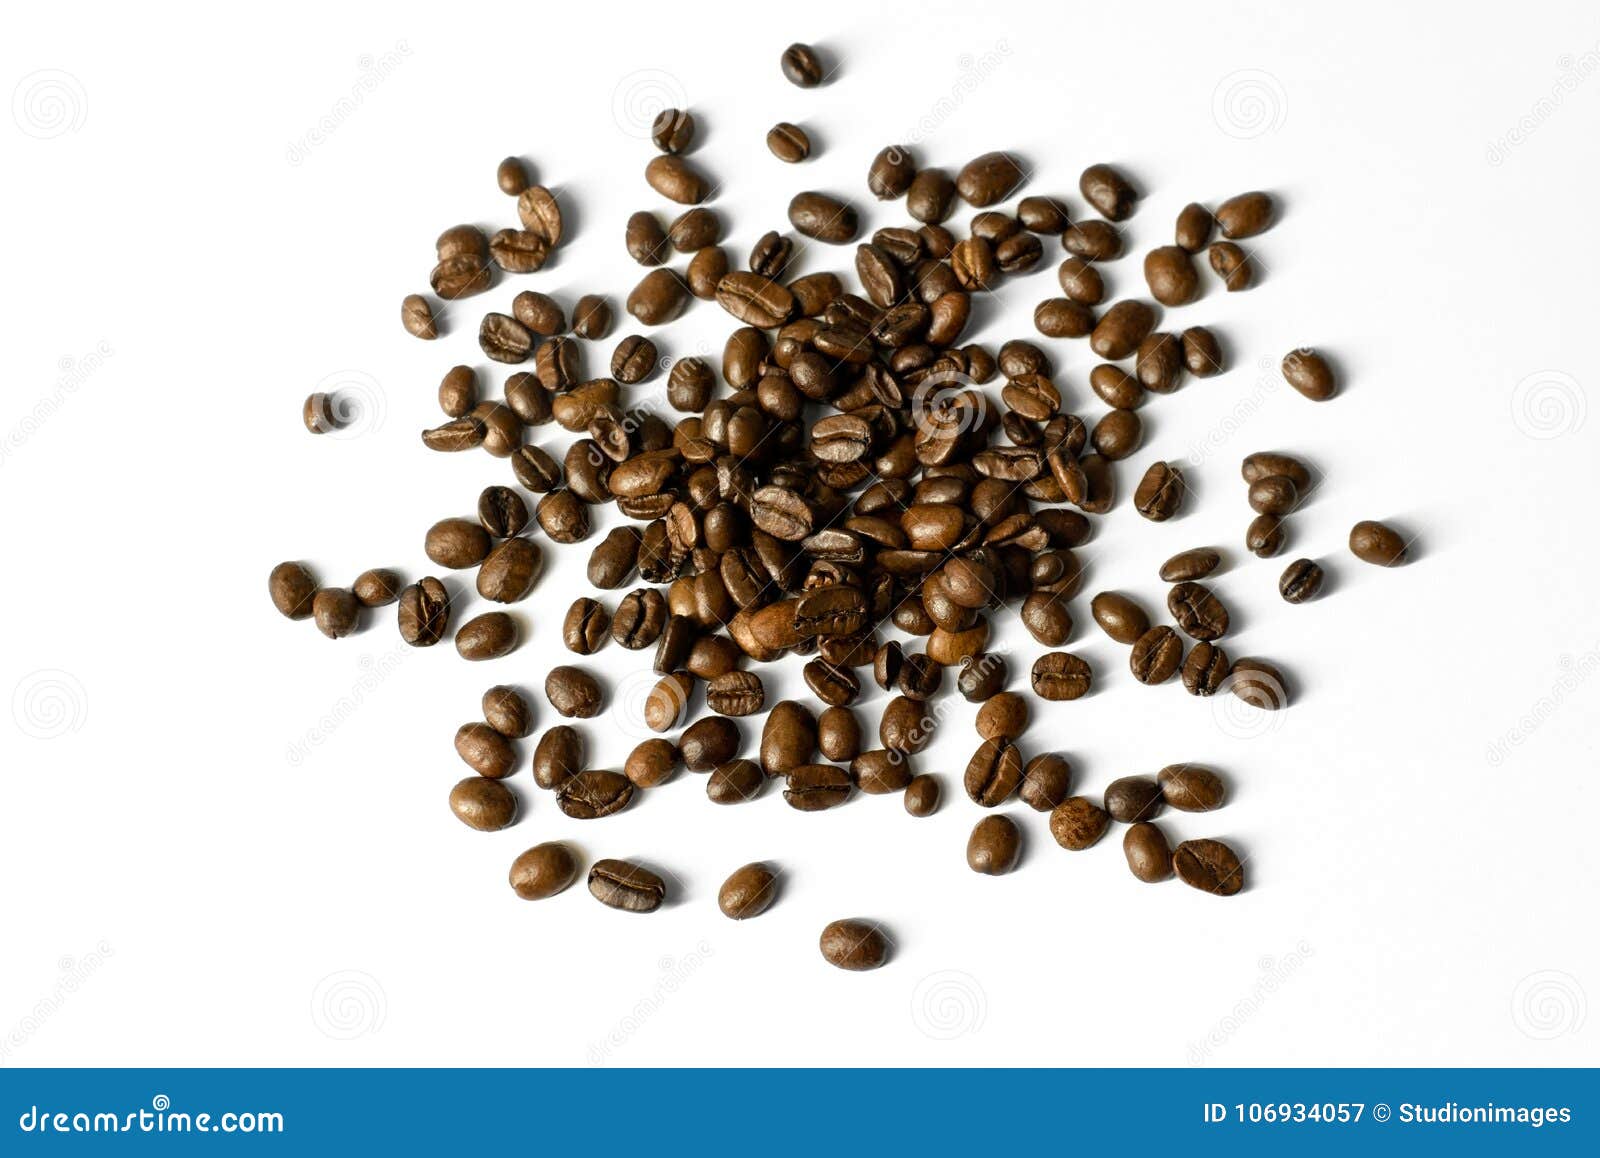 Arrangement of Scattered Coffee Beans Isolated on White - Design ...